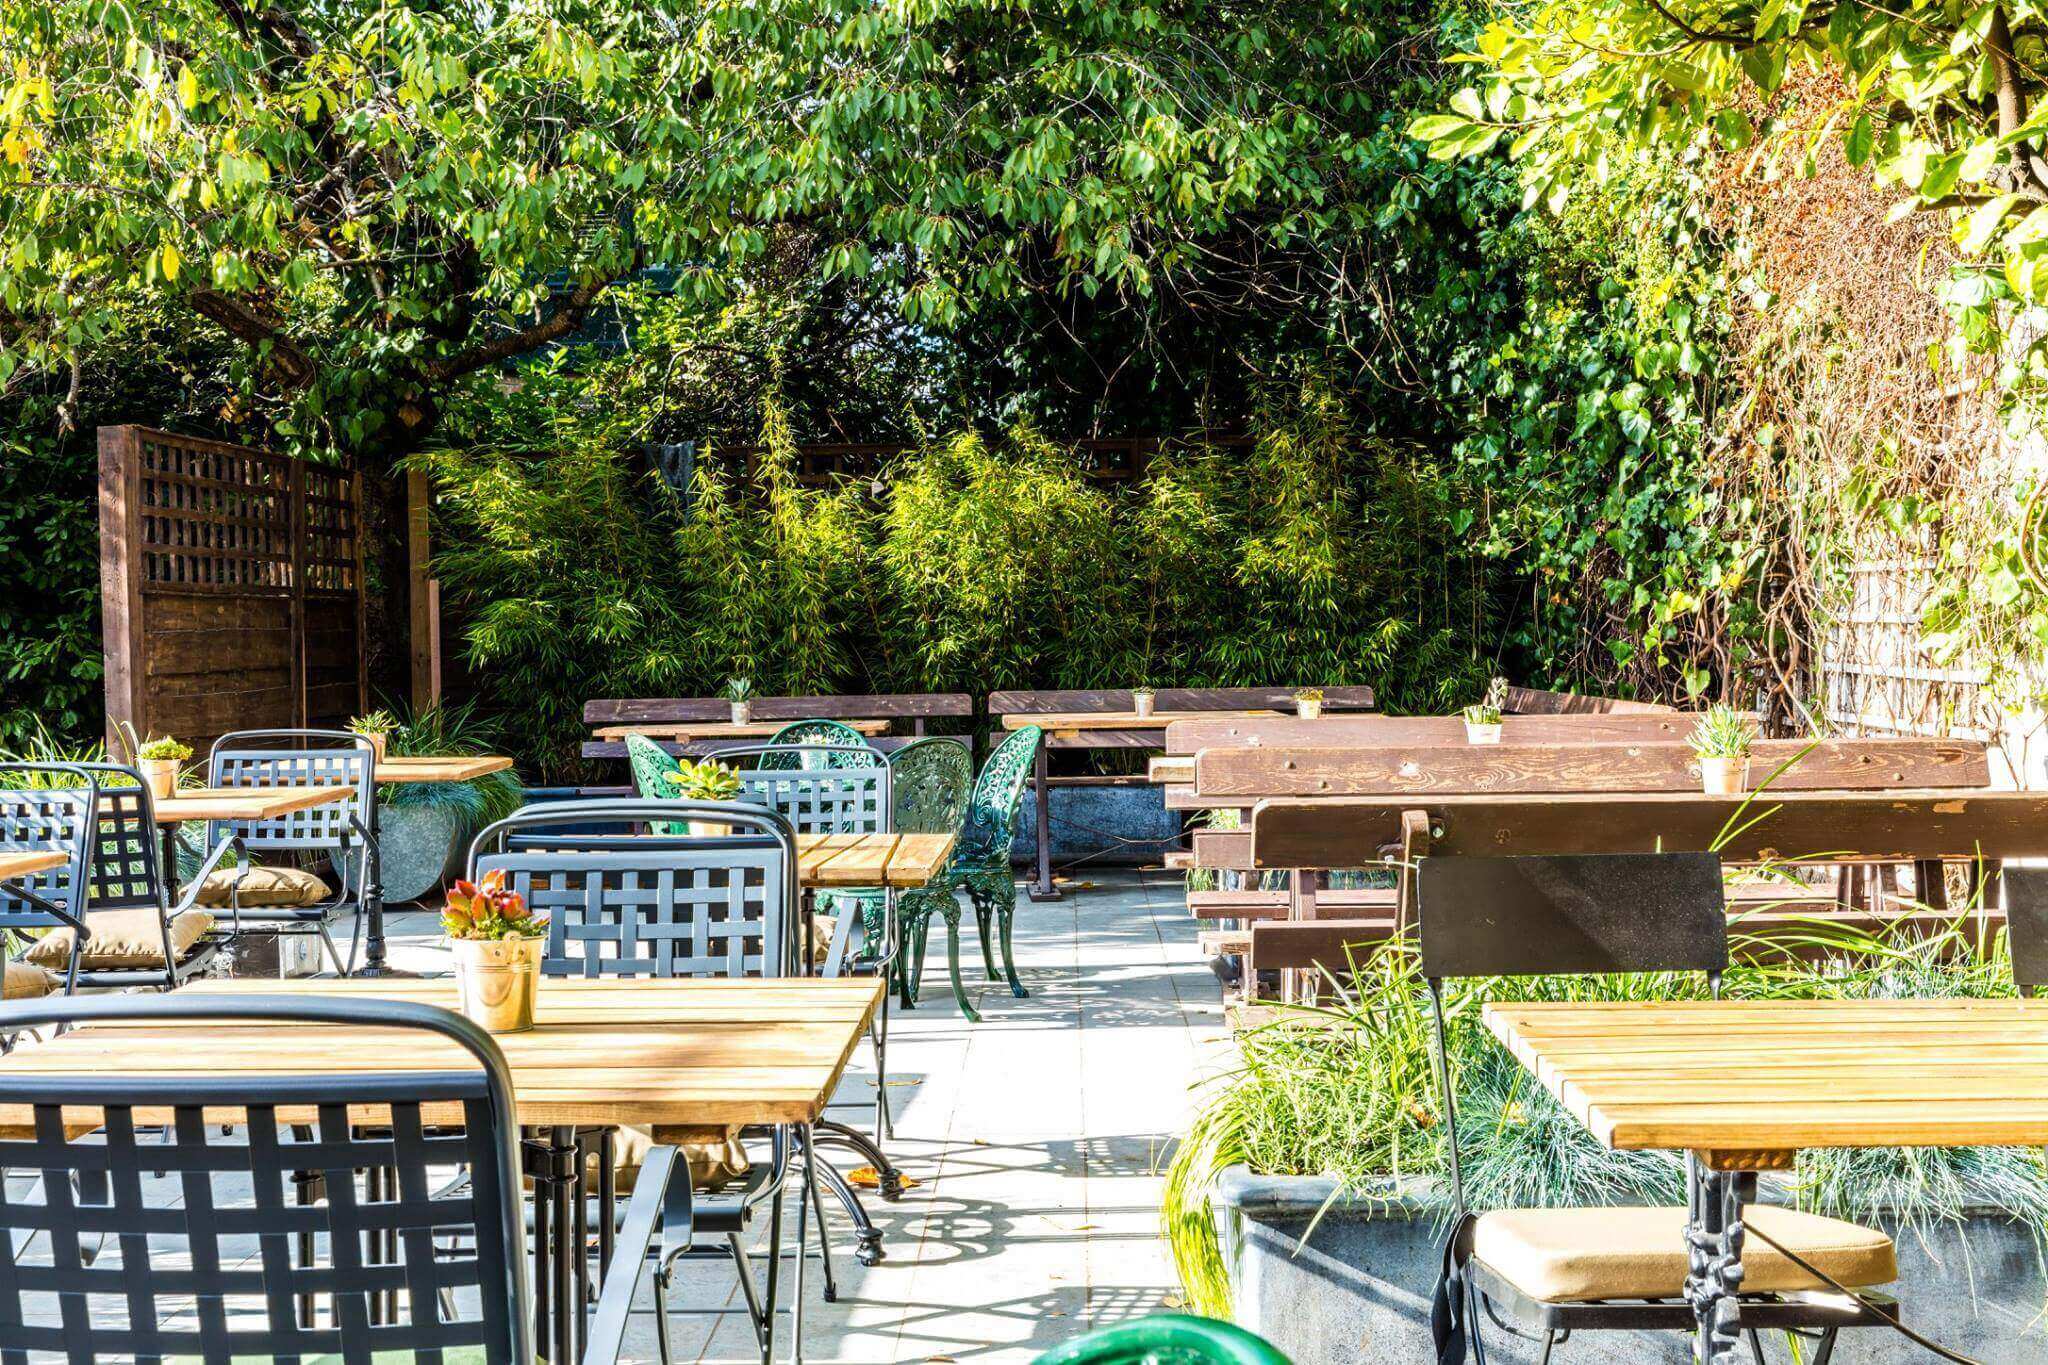 Best Beer Gardens | Gift ideas for Dad Father's Day